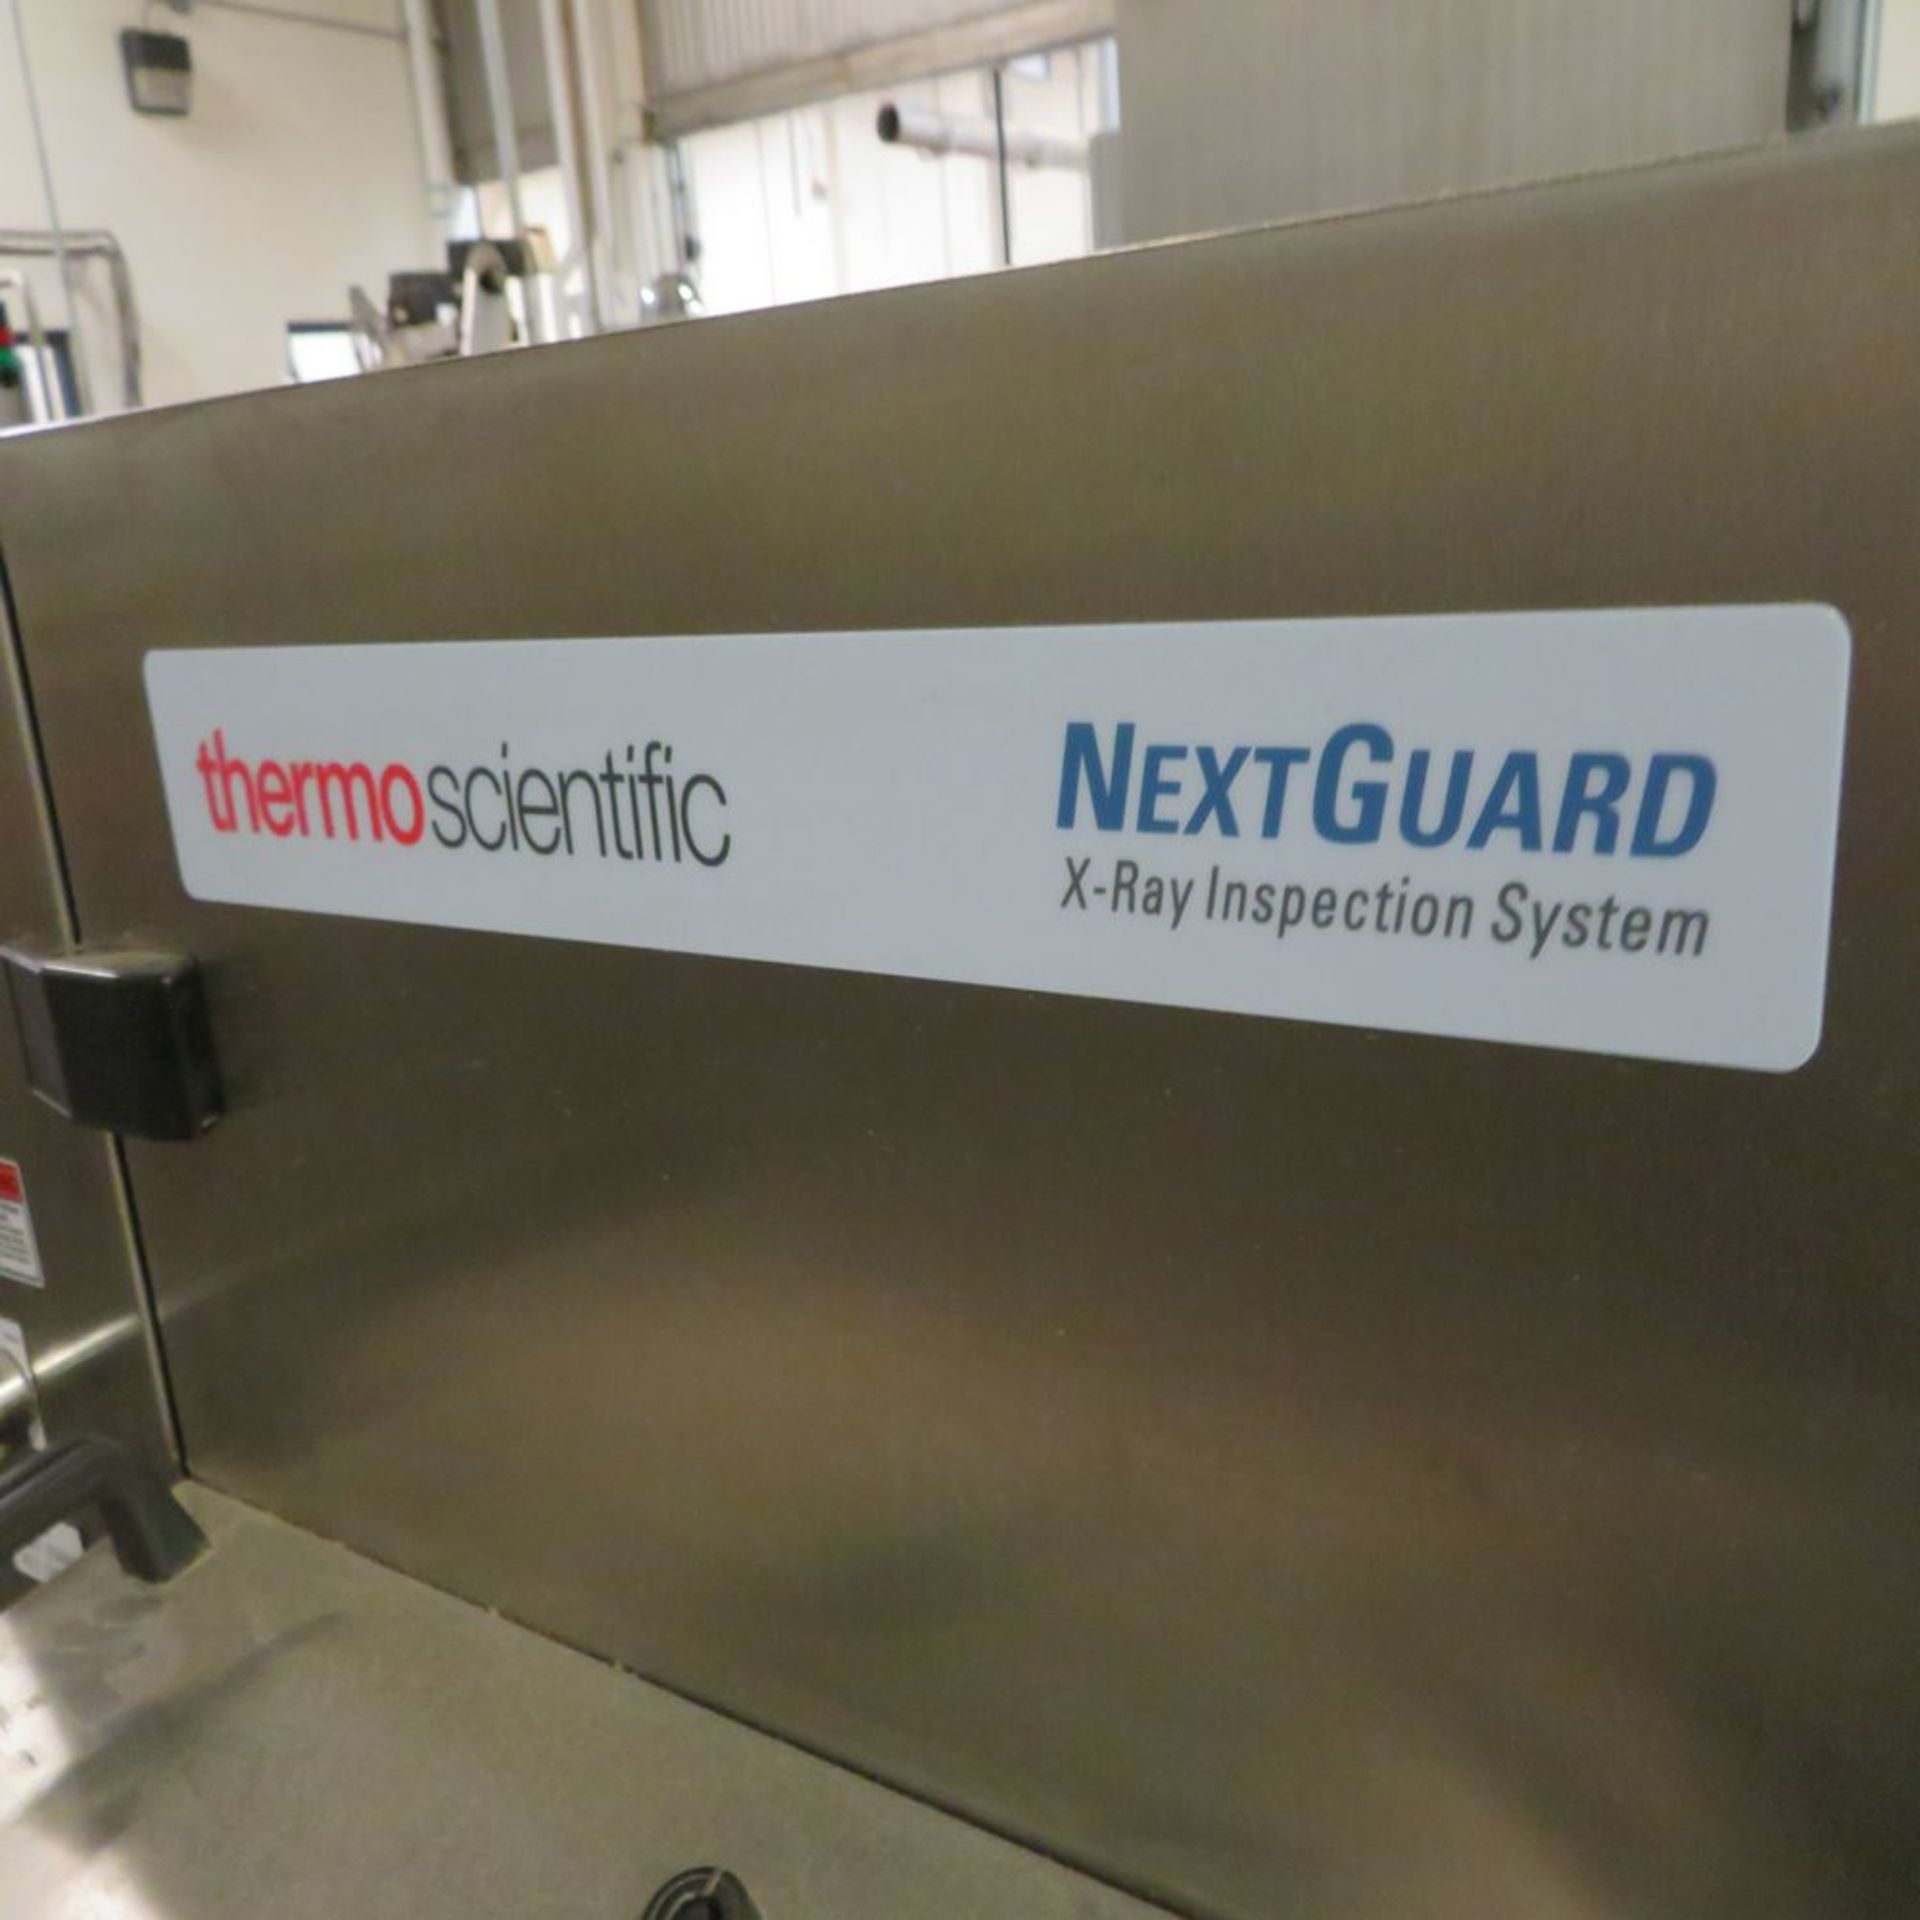 Thermo Scientifica mod. NXGRD L330, Next Guard X-Ray Inspection System, 8'' x 14''L Opening - Image 2 of 2